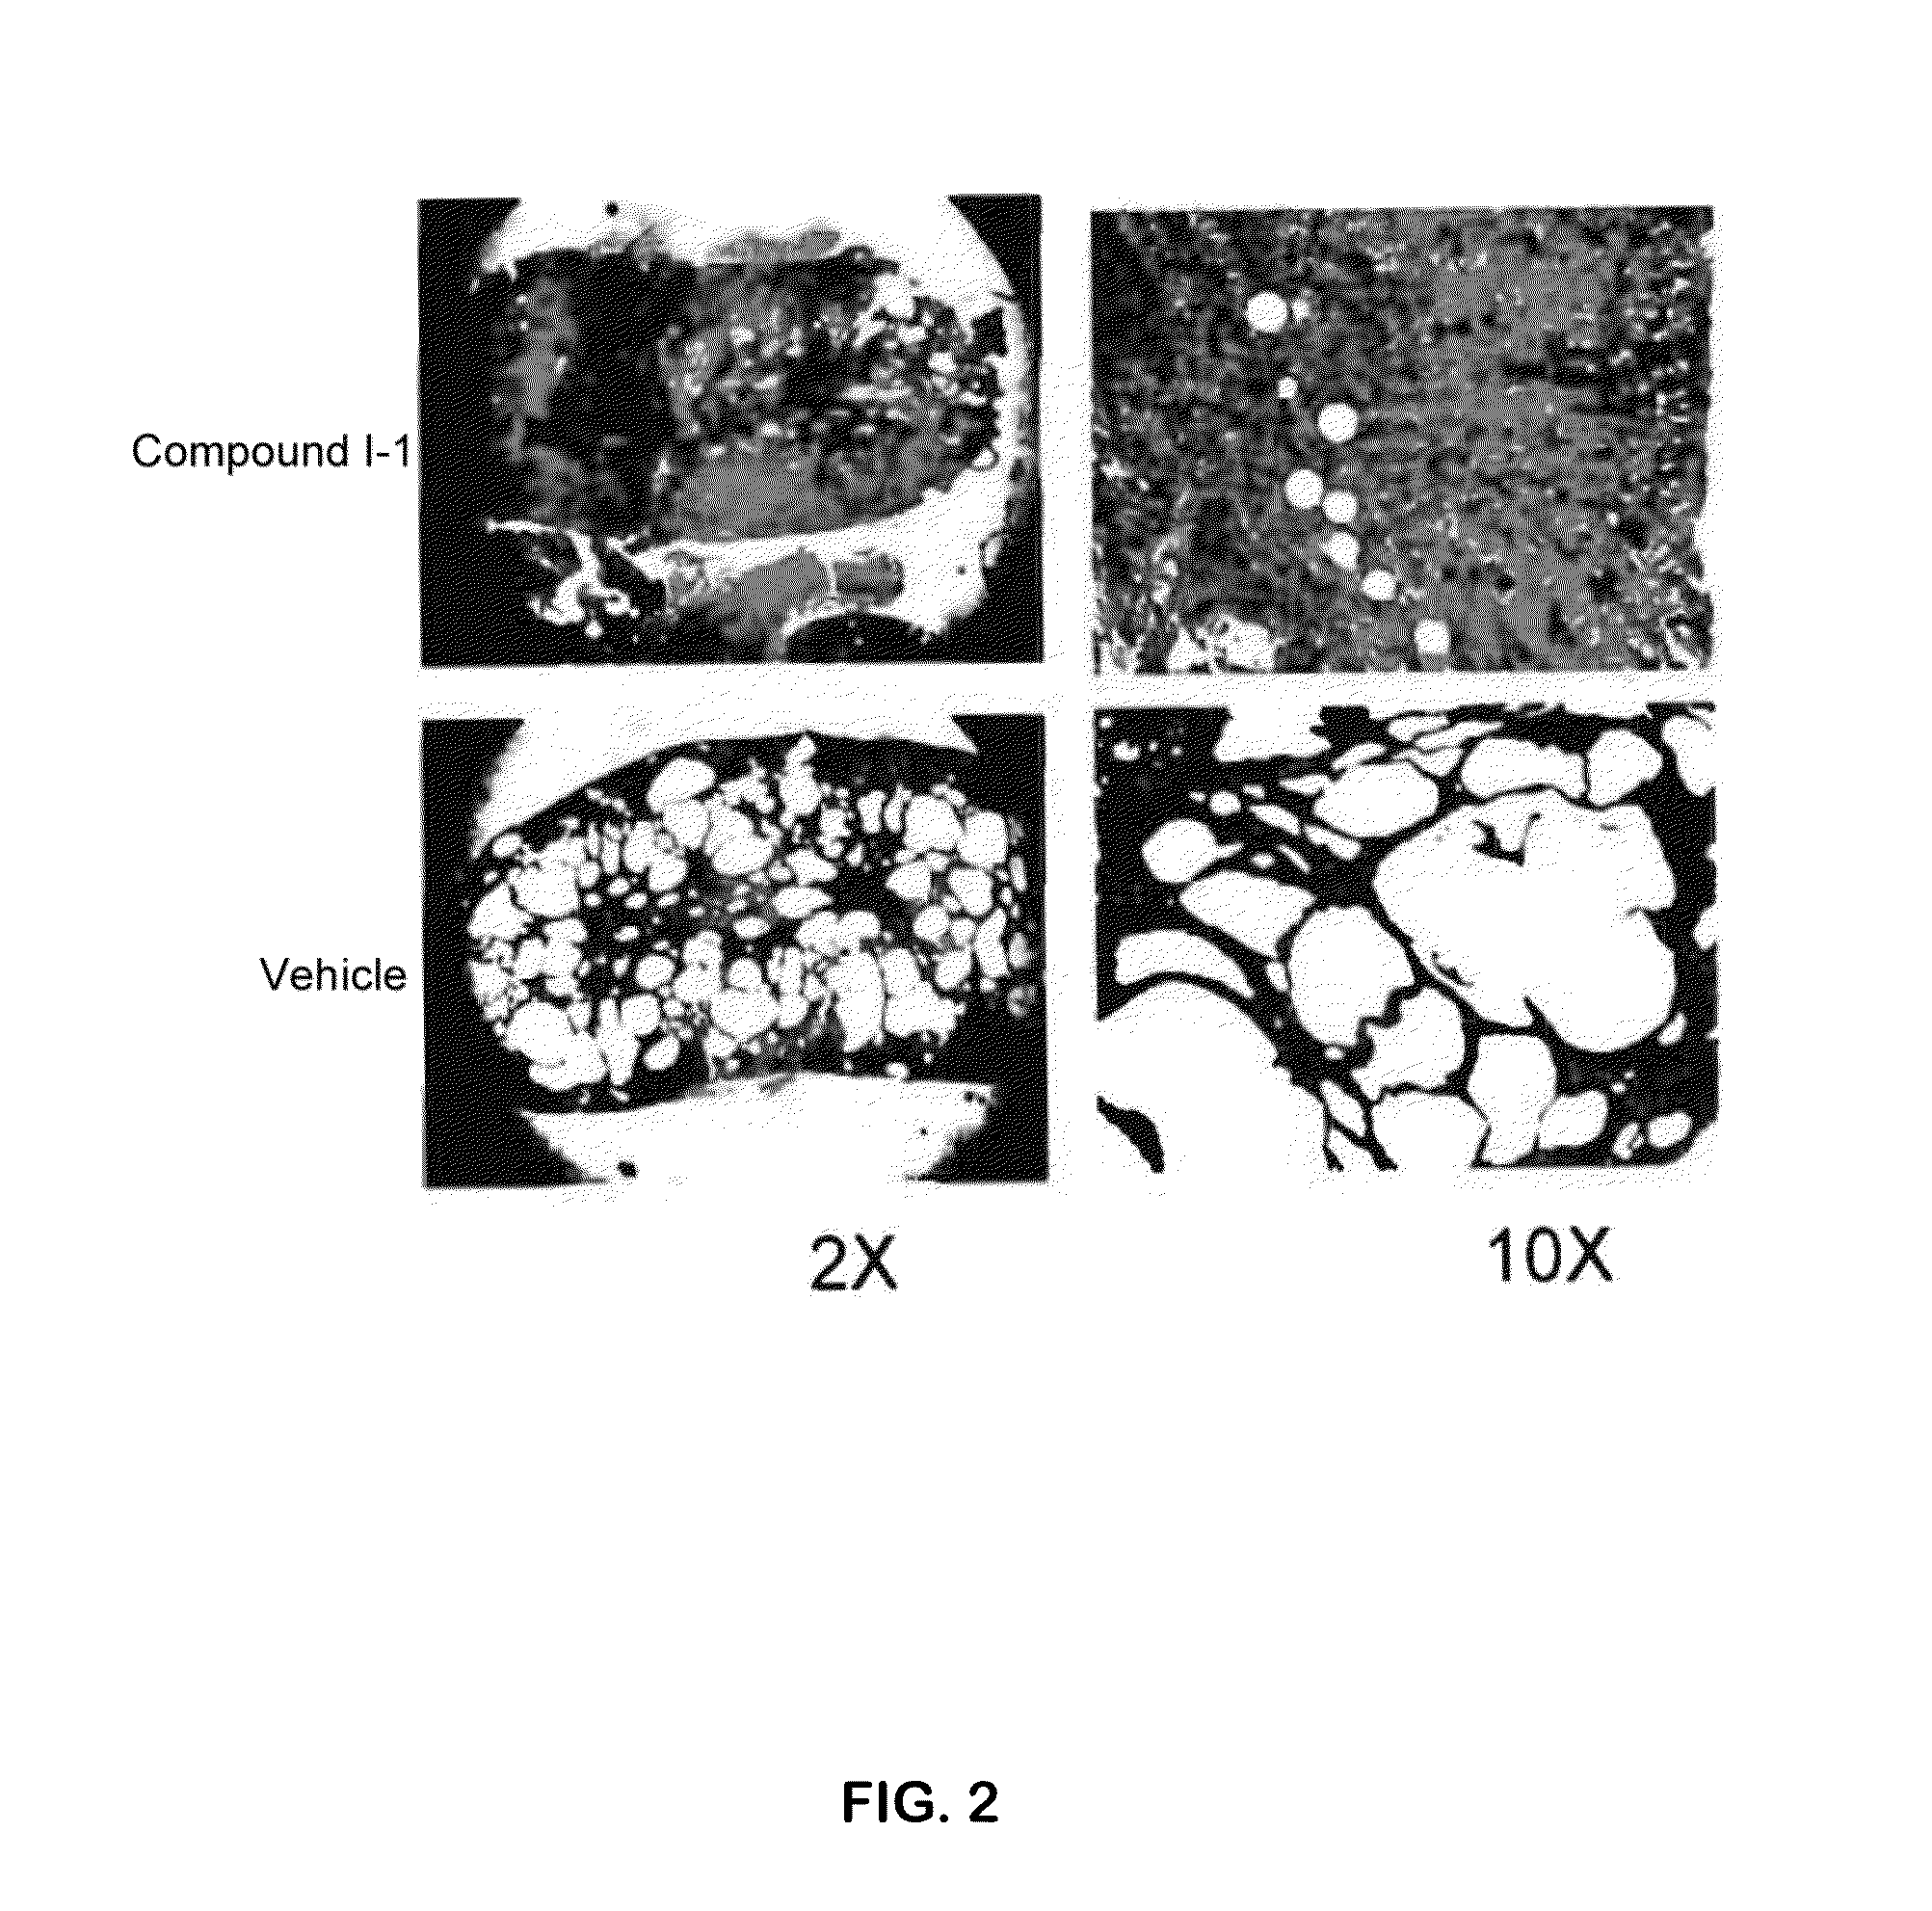 Methods for treating polycystic kidney disease and polycystic liver disease